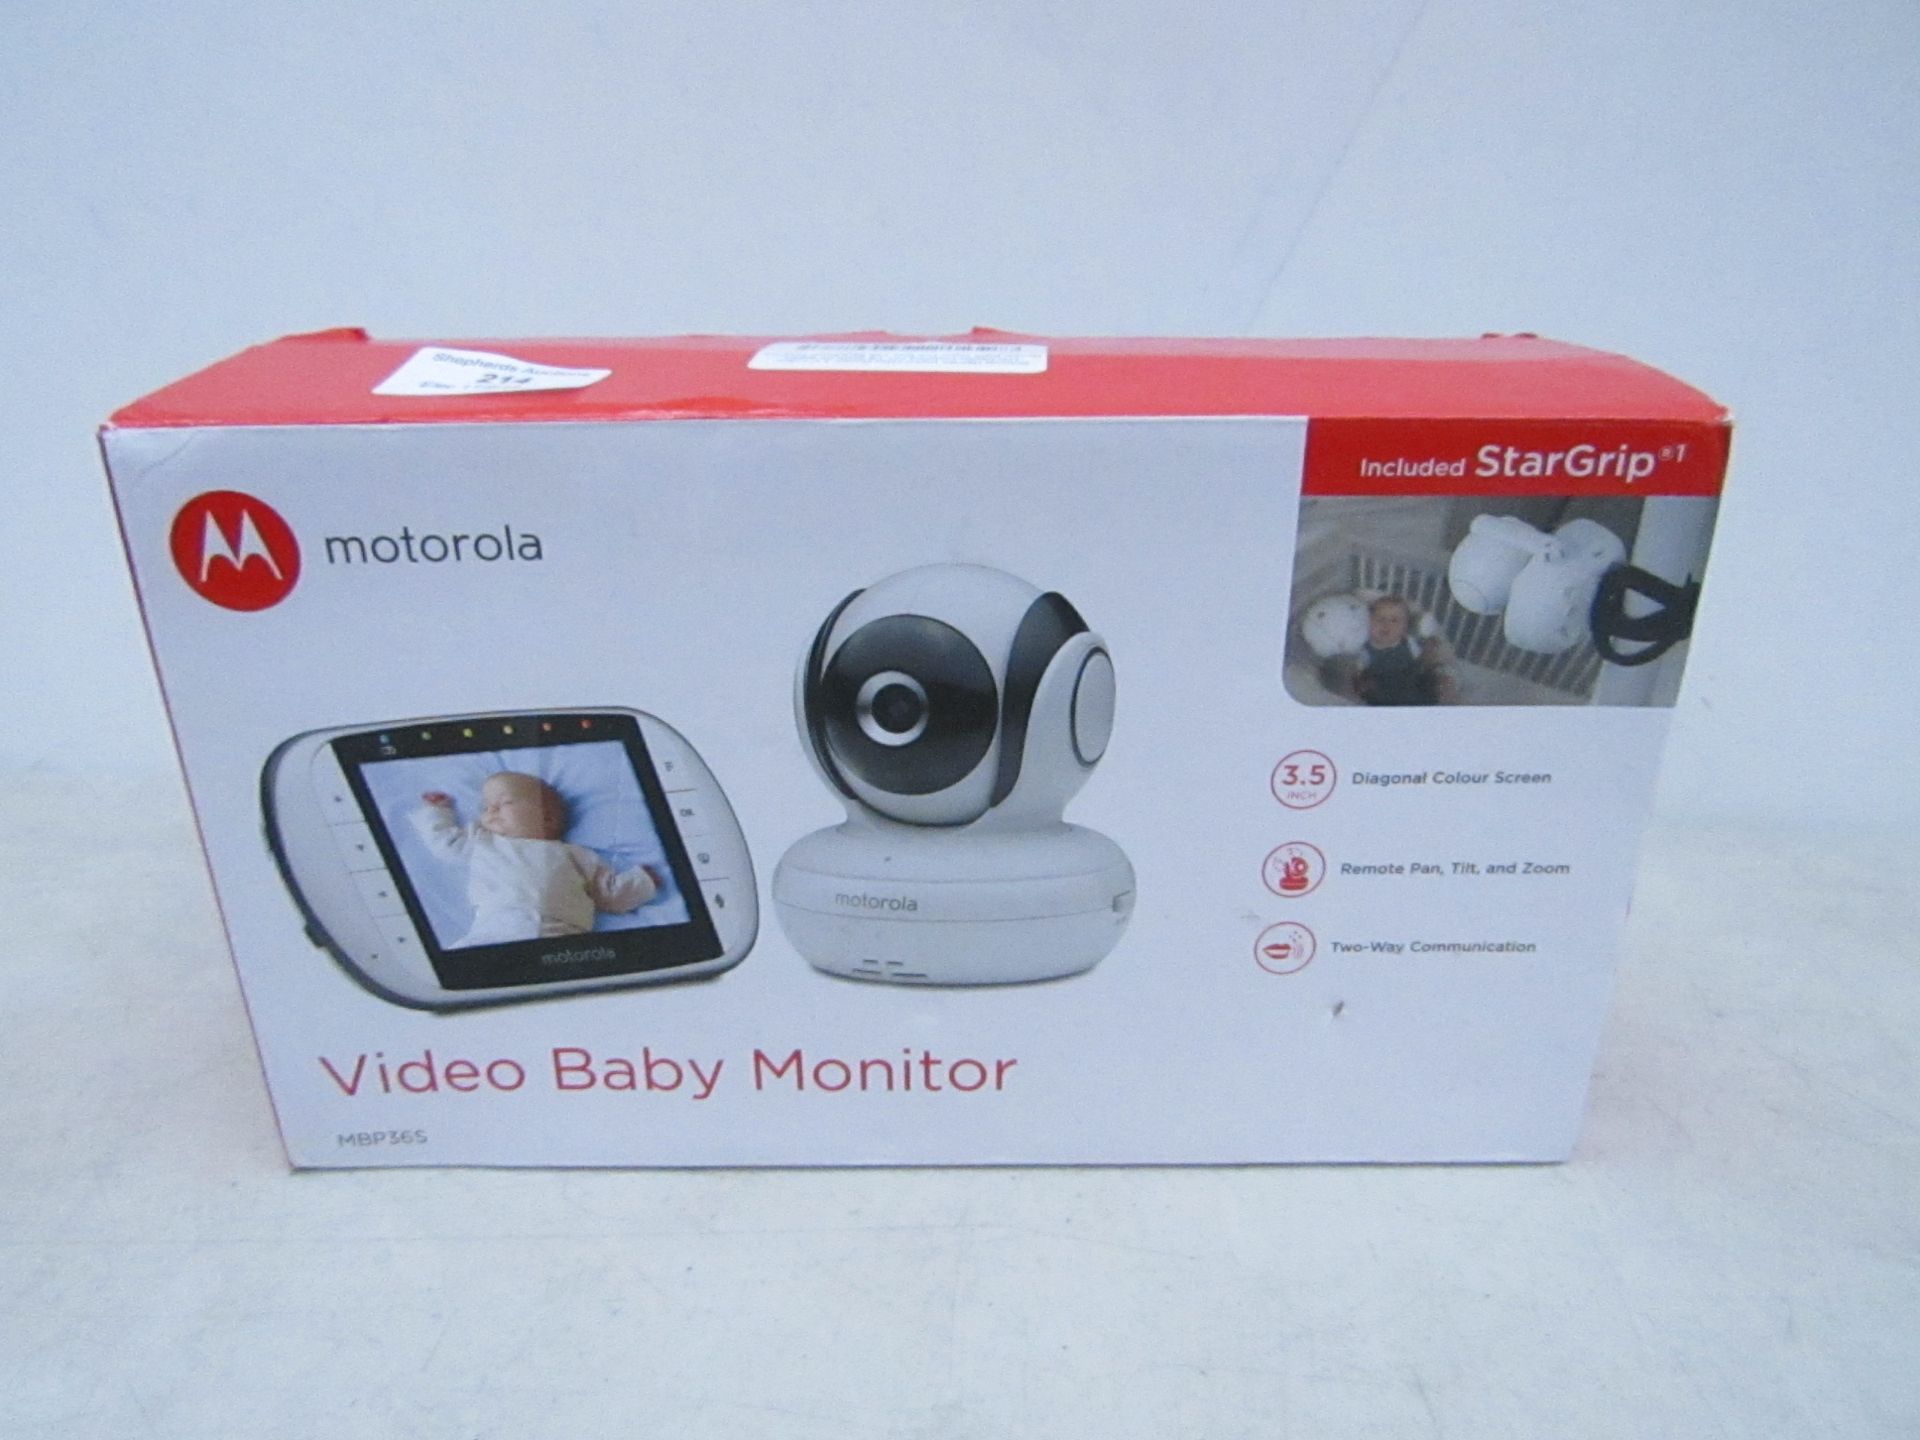 Motorola video baby monitor, unchecked and boxed.